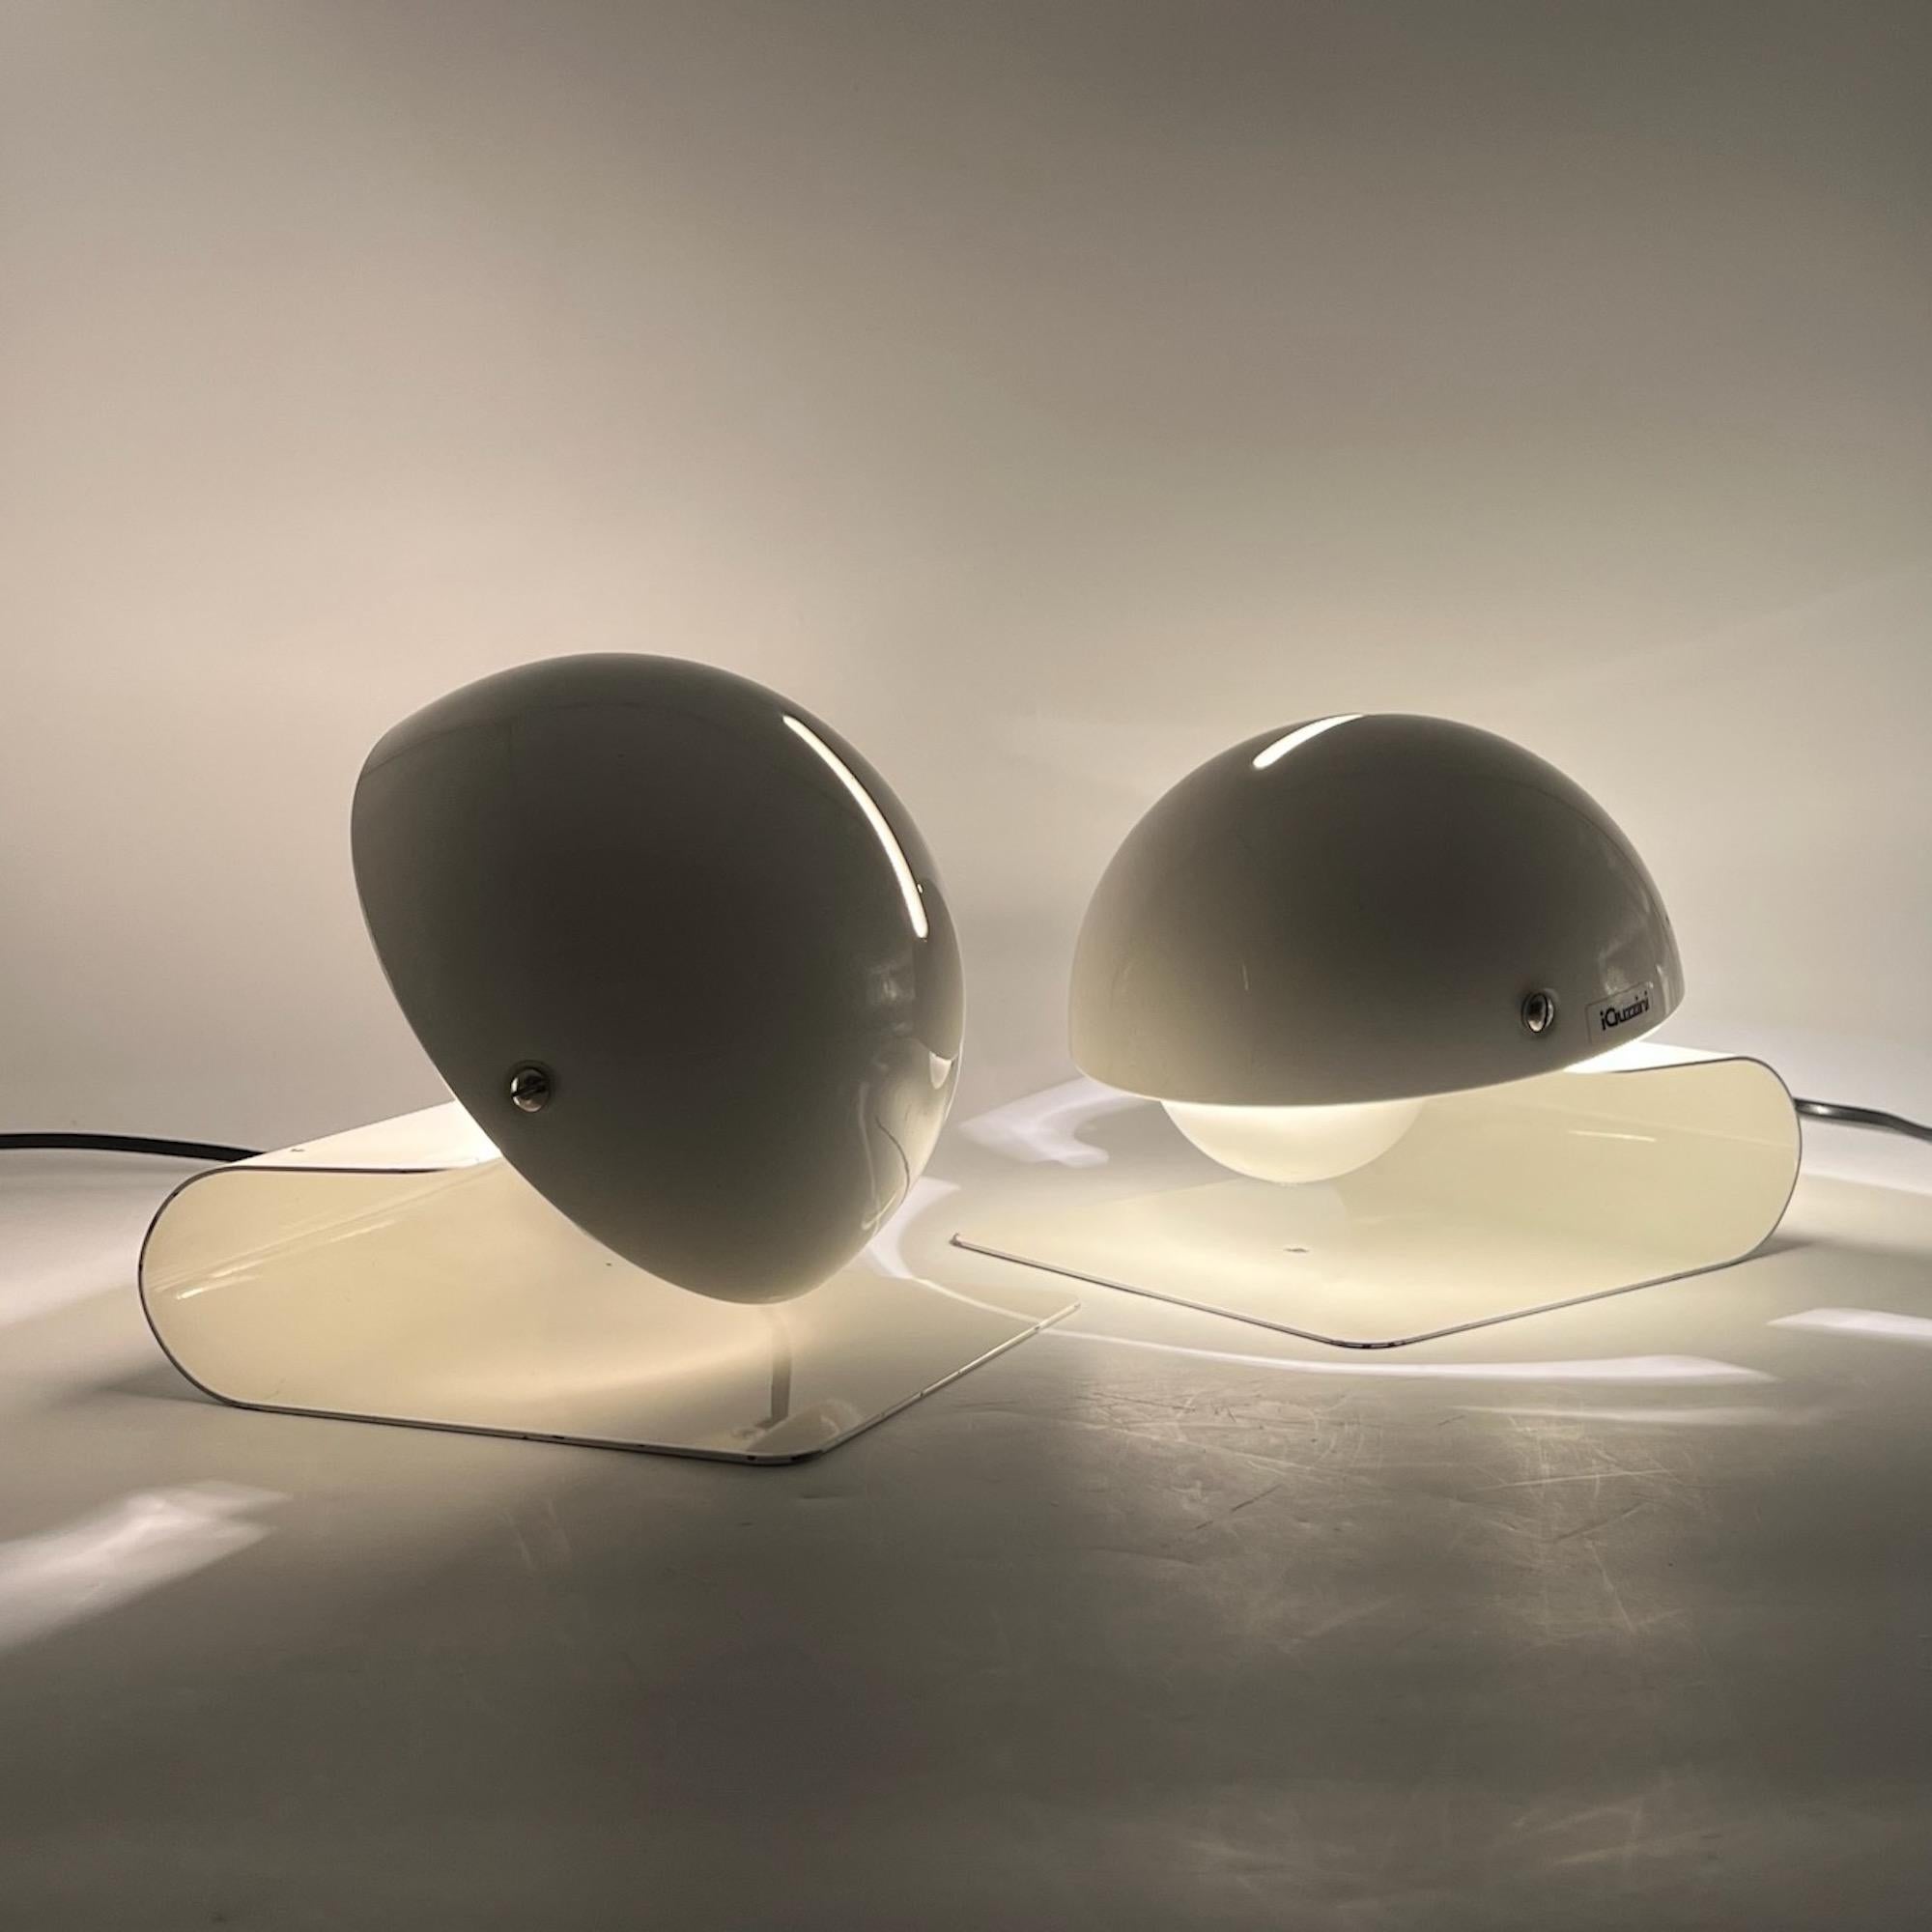 Beautiful set of ‘Bugia’ table lamps, designed by Giuseppe Cormio for the Milano 1975 Fair and expertly crafted by iGuzzini in 1976.

These lamps are made of a curved base crafted from a metal sheet with a tiltable half-globe lampshade allows for